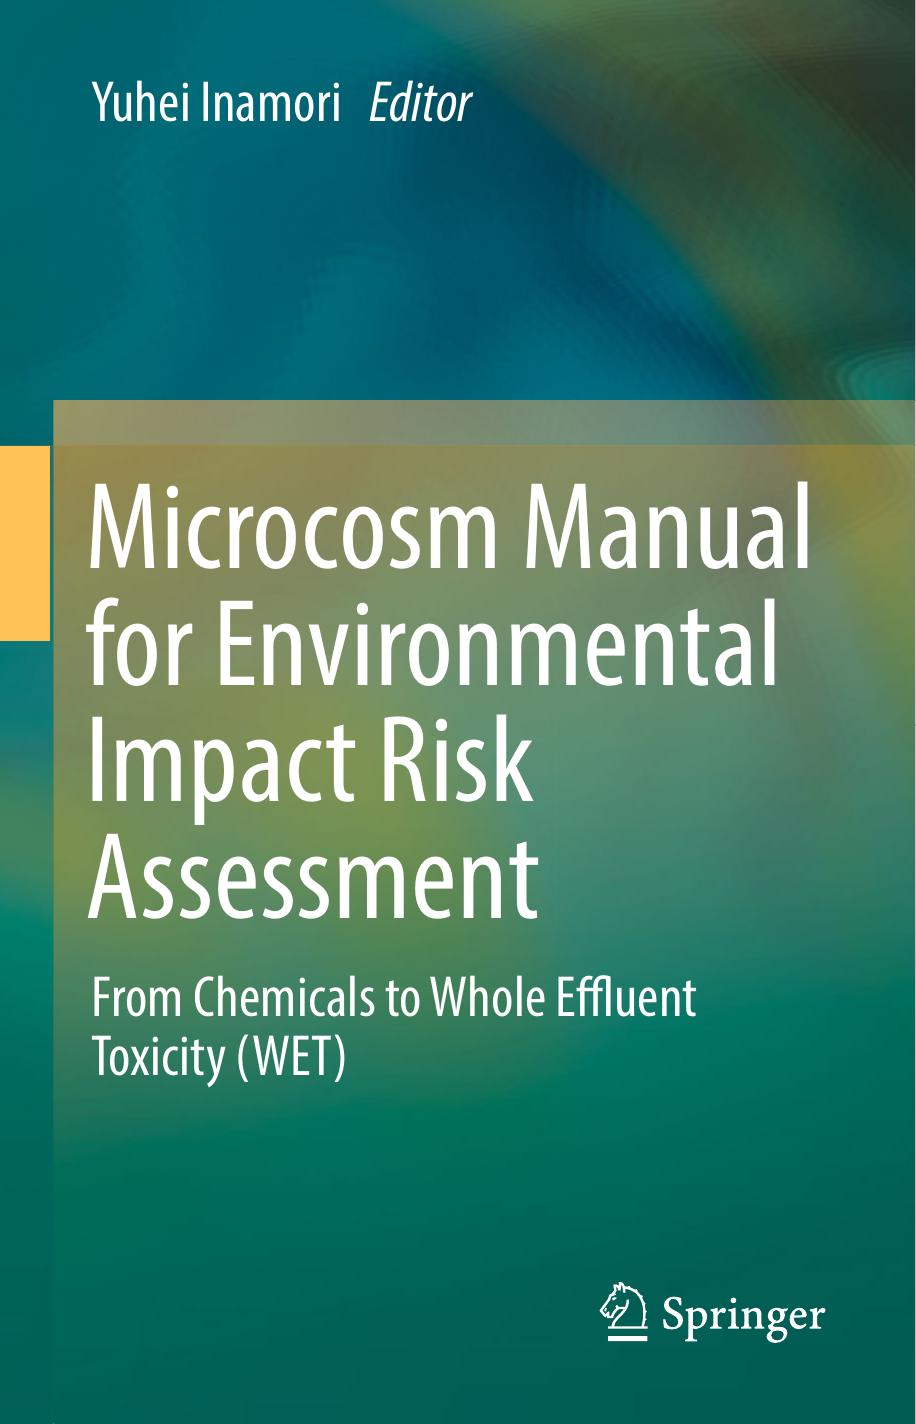 Microcosm Manual for Environmental Impact Risk Assessment  From Chemicals to Whole Effluent Toxicity (WET)(2020)